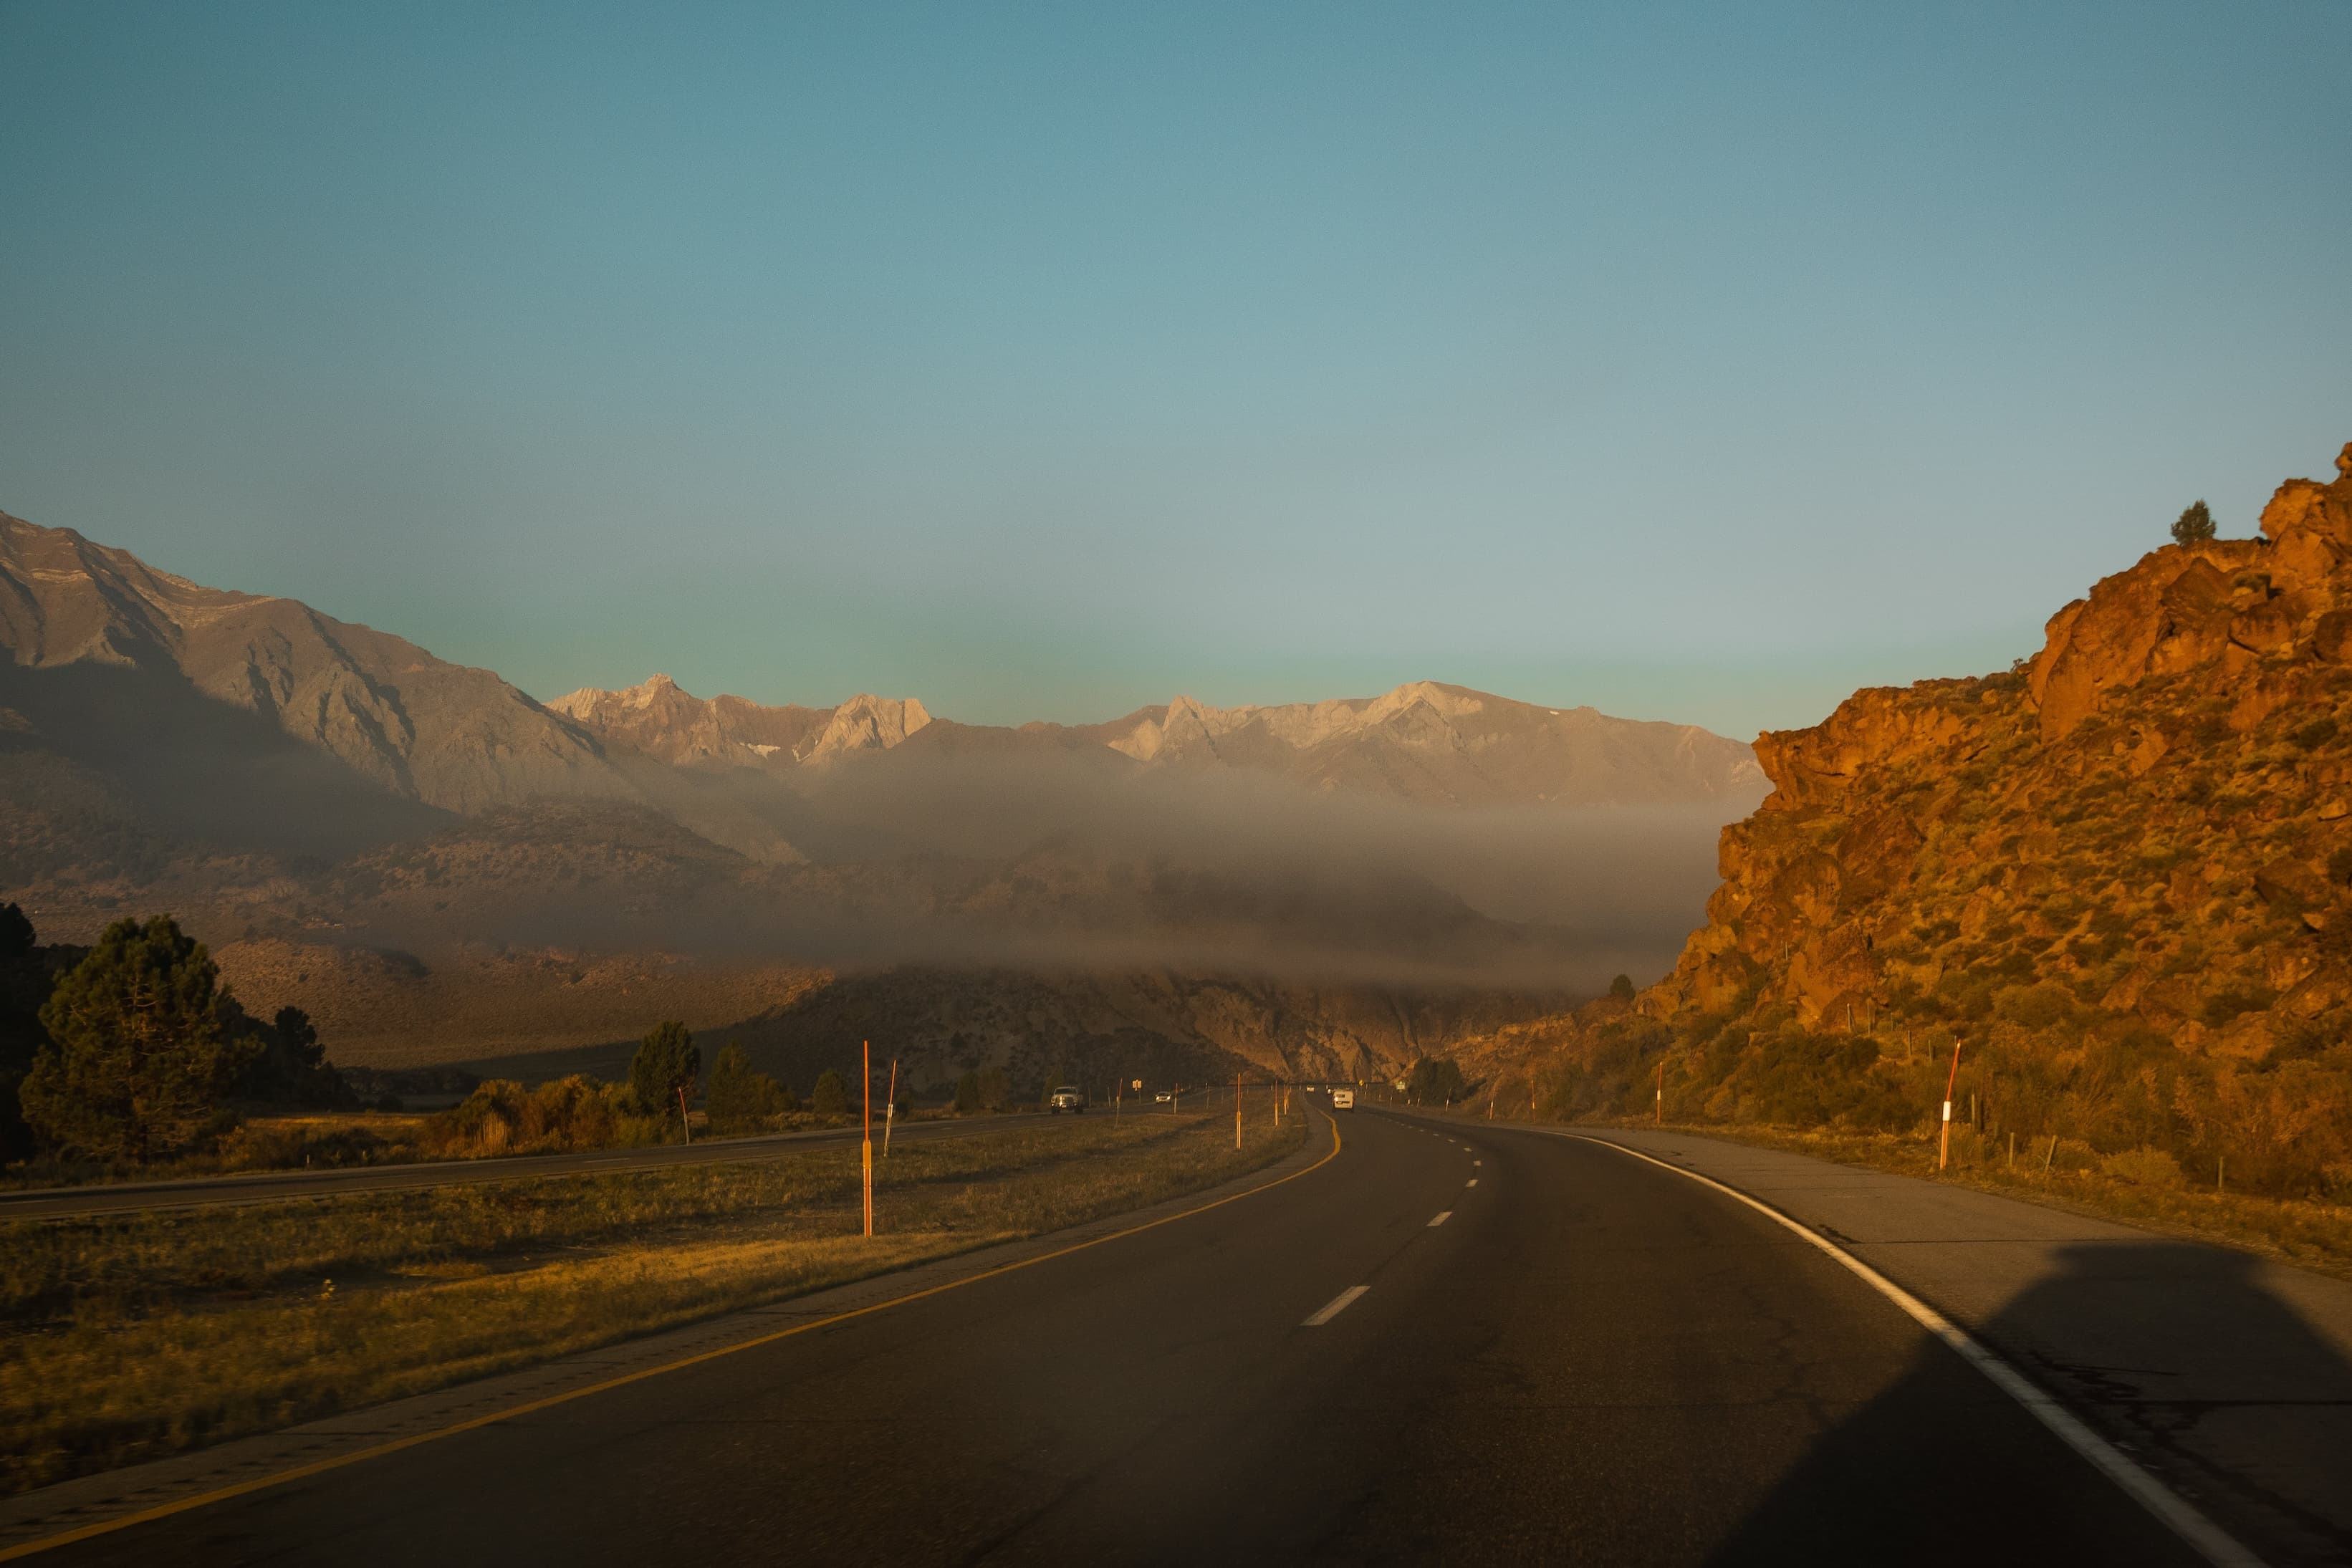 A highway stretches toward mountains veiled in mist, bathed in the golden light of sunrise, with rugged terrain on the right.